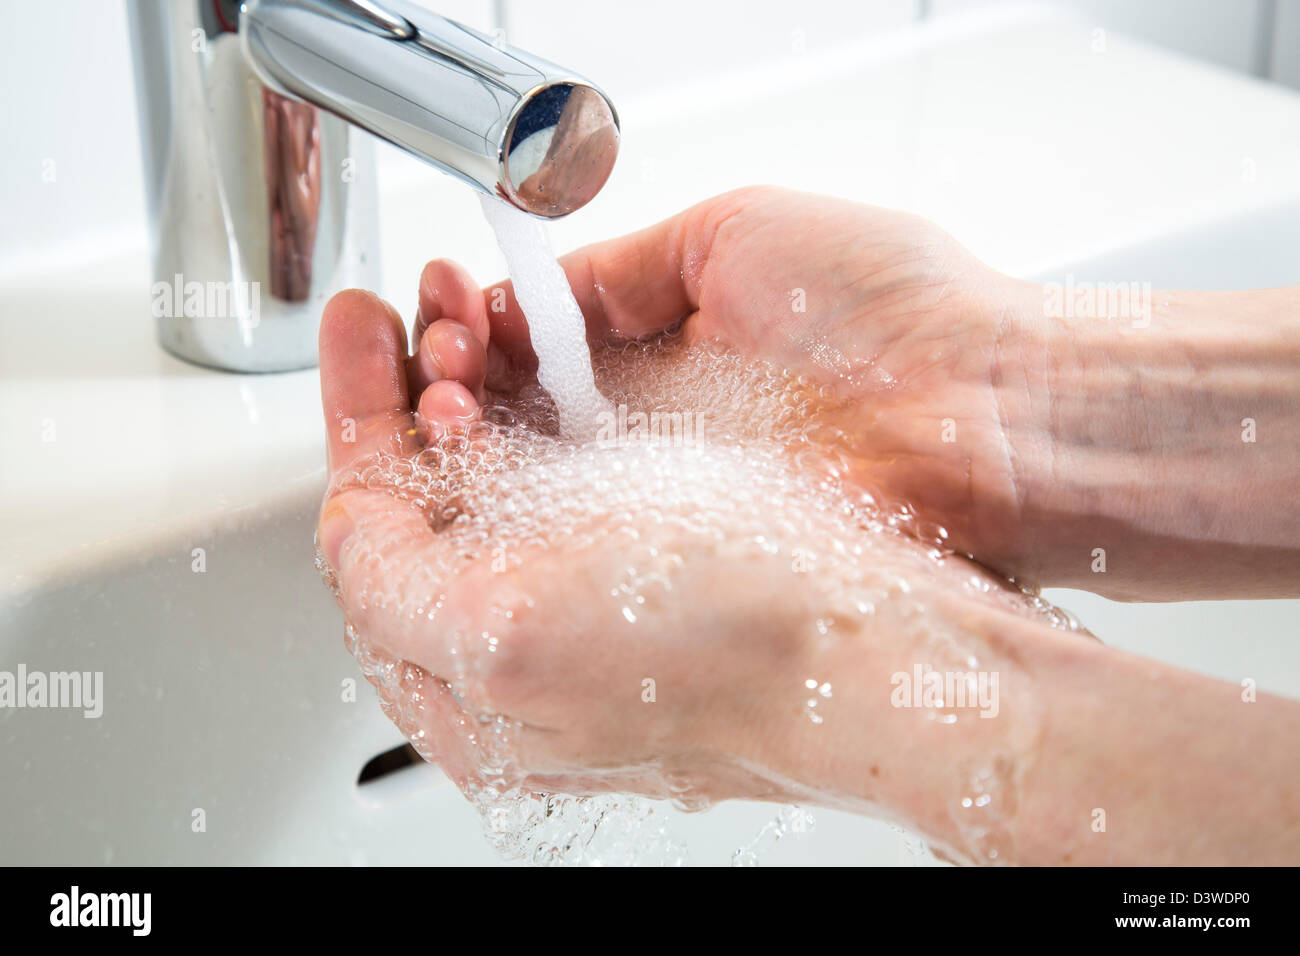 Person is washing her hands under running water from a tap in a bathroom. Symbol image for water wastage. Stock Photo